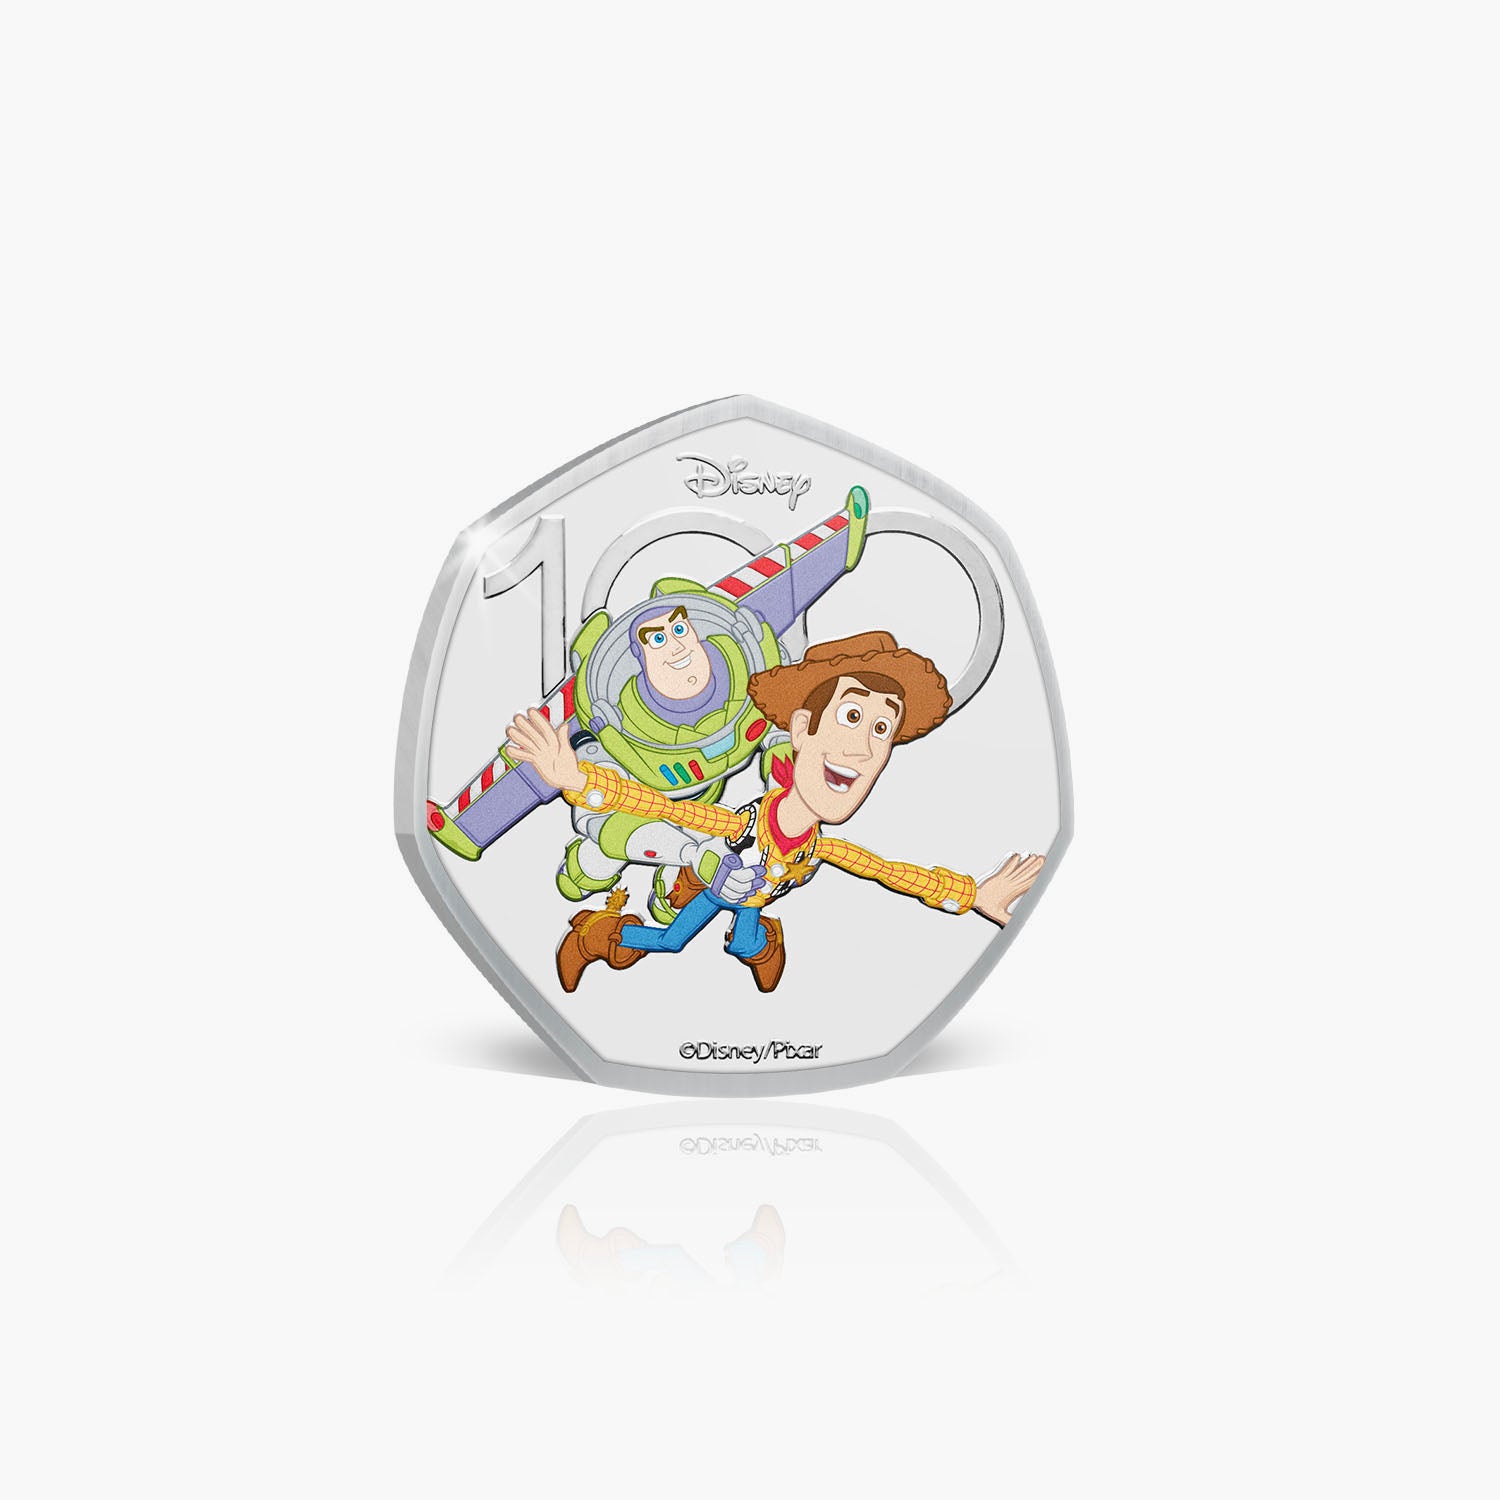 Disney 100th Anniversary Toy Story 2023 50p BU Color Coin